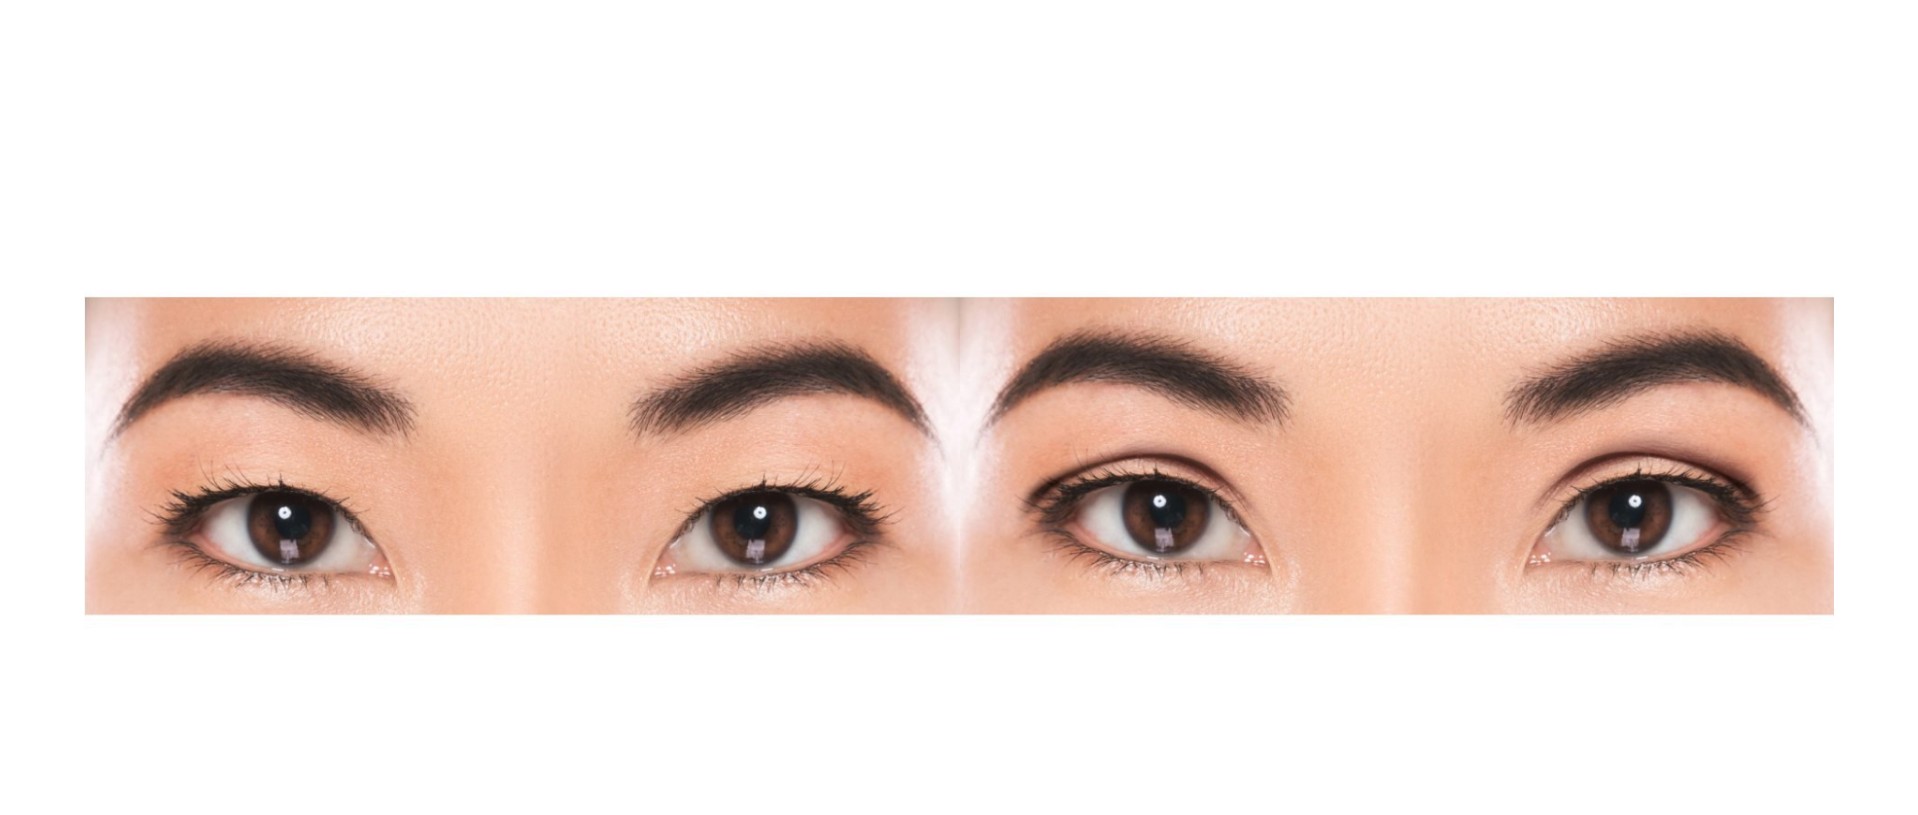 Asian eyelid surgery blepharoplasty before and after